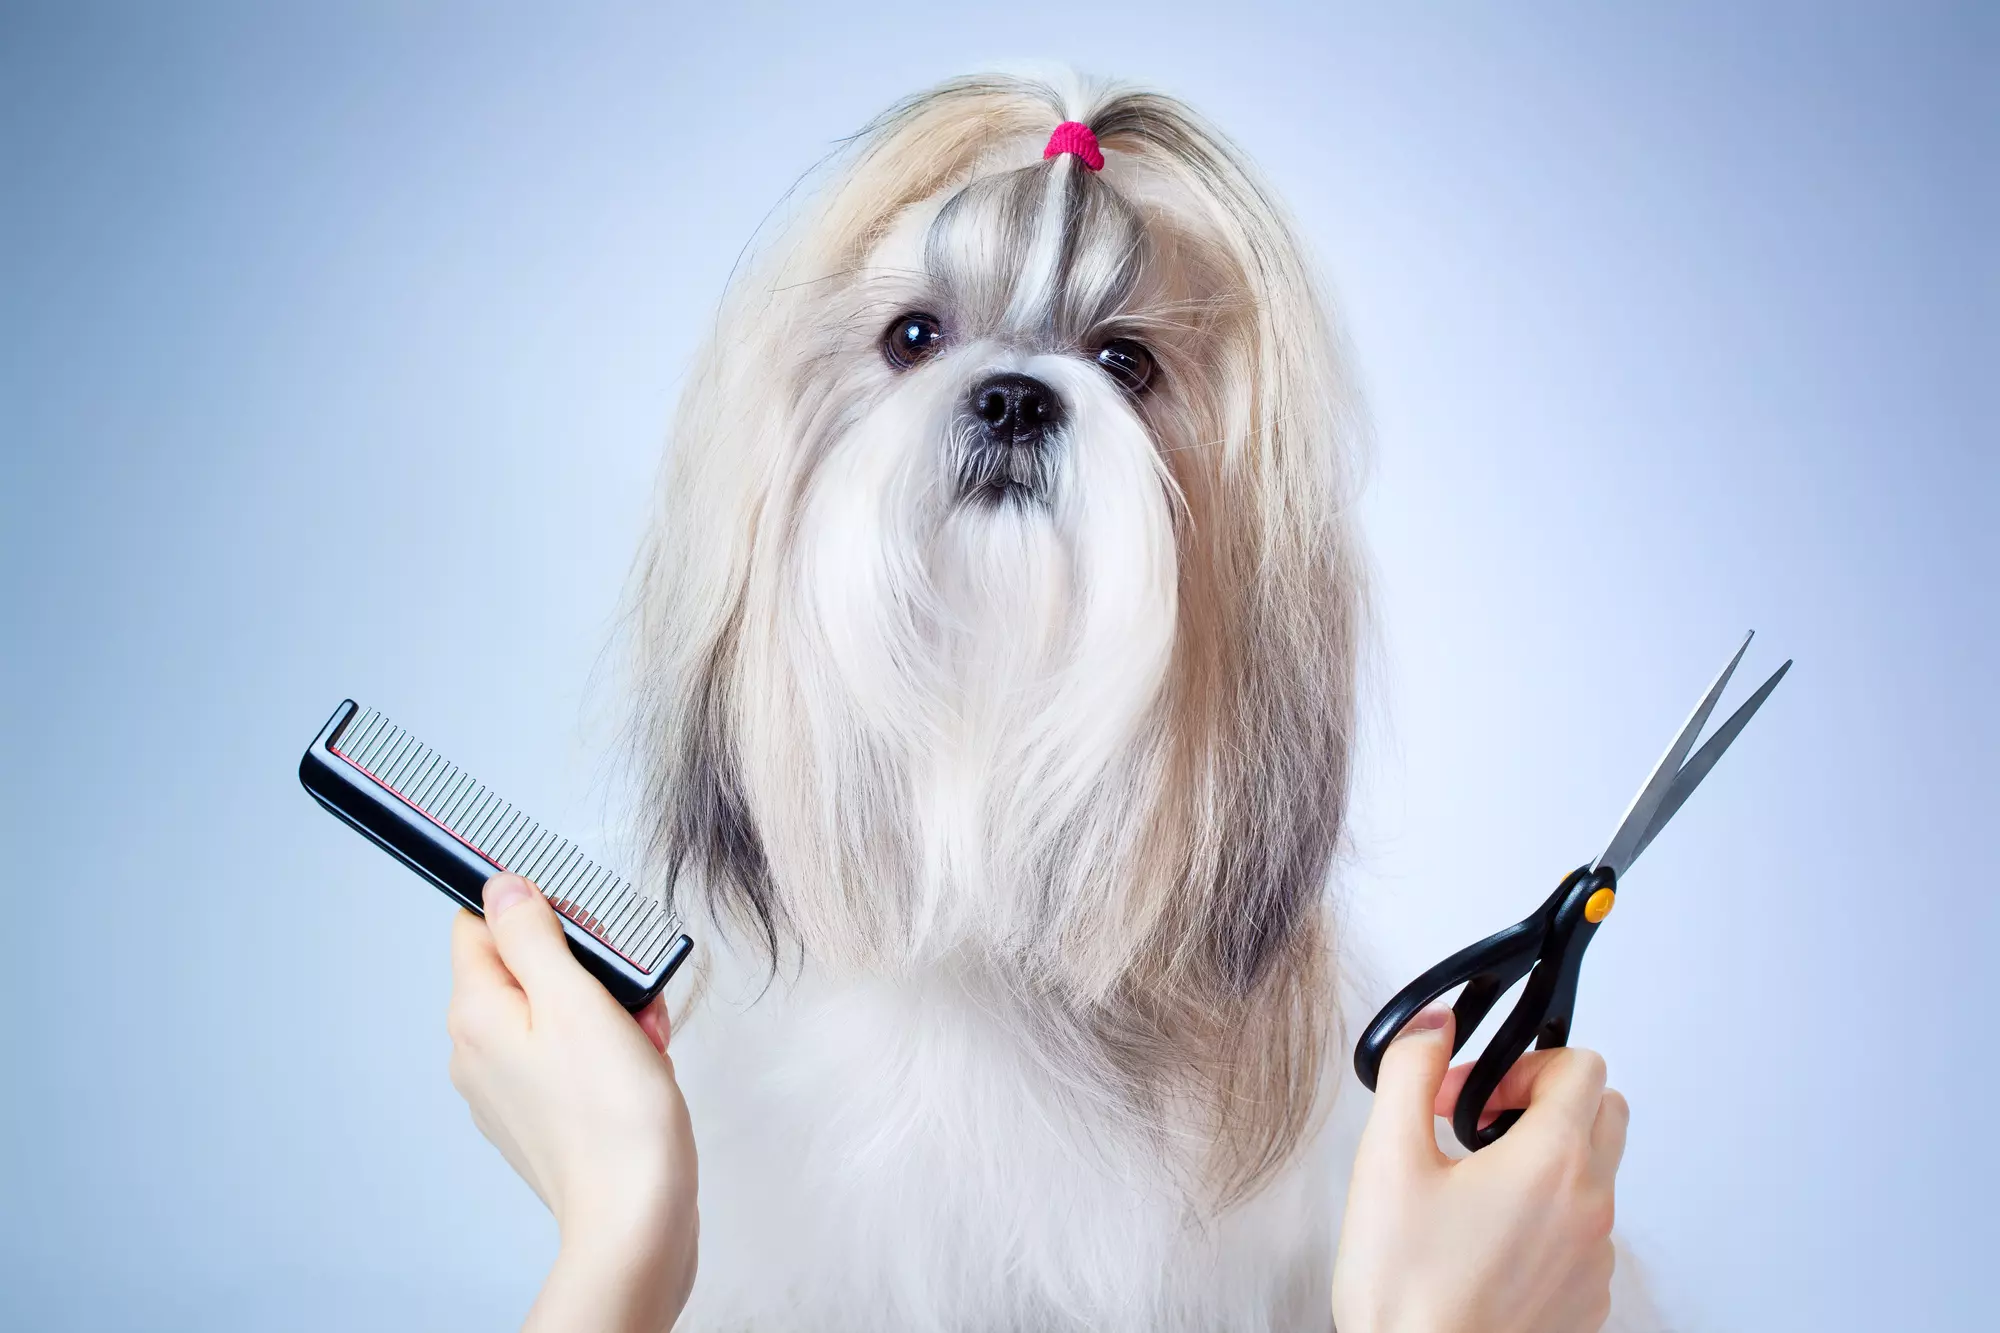 How do you know if your dog is grooming himself correctly?